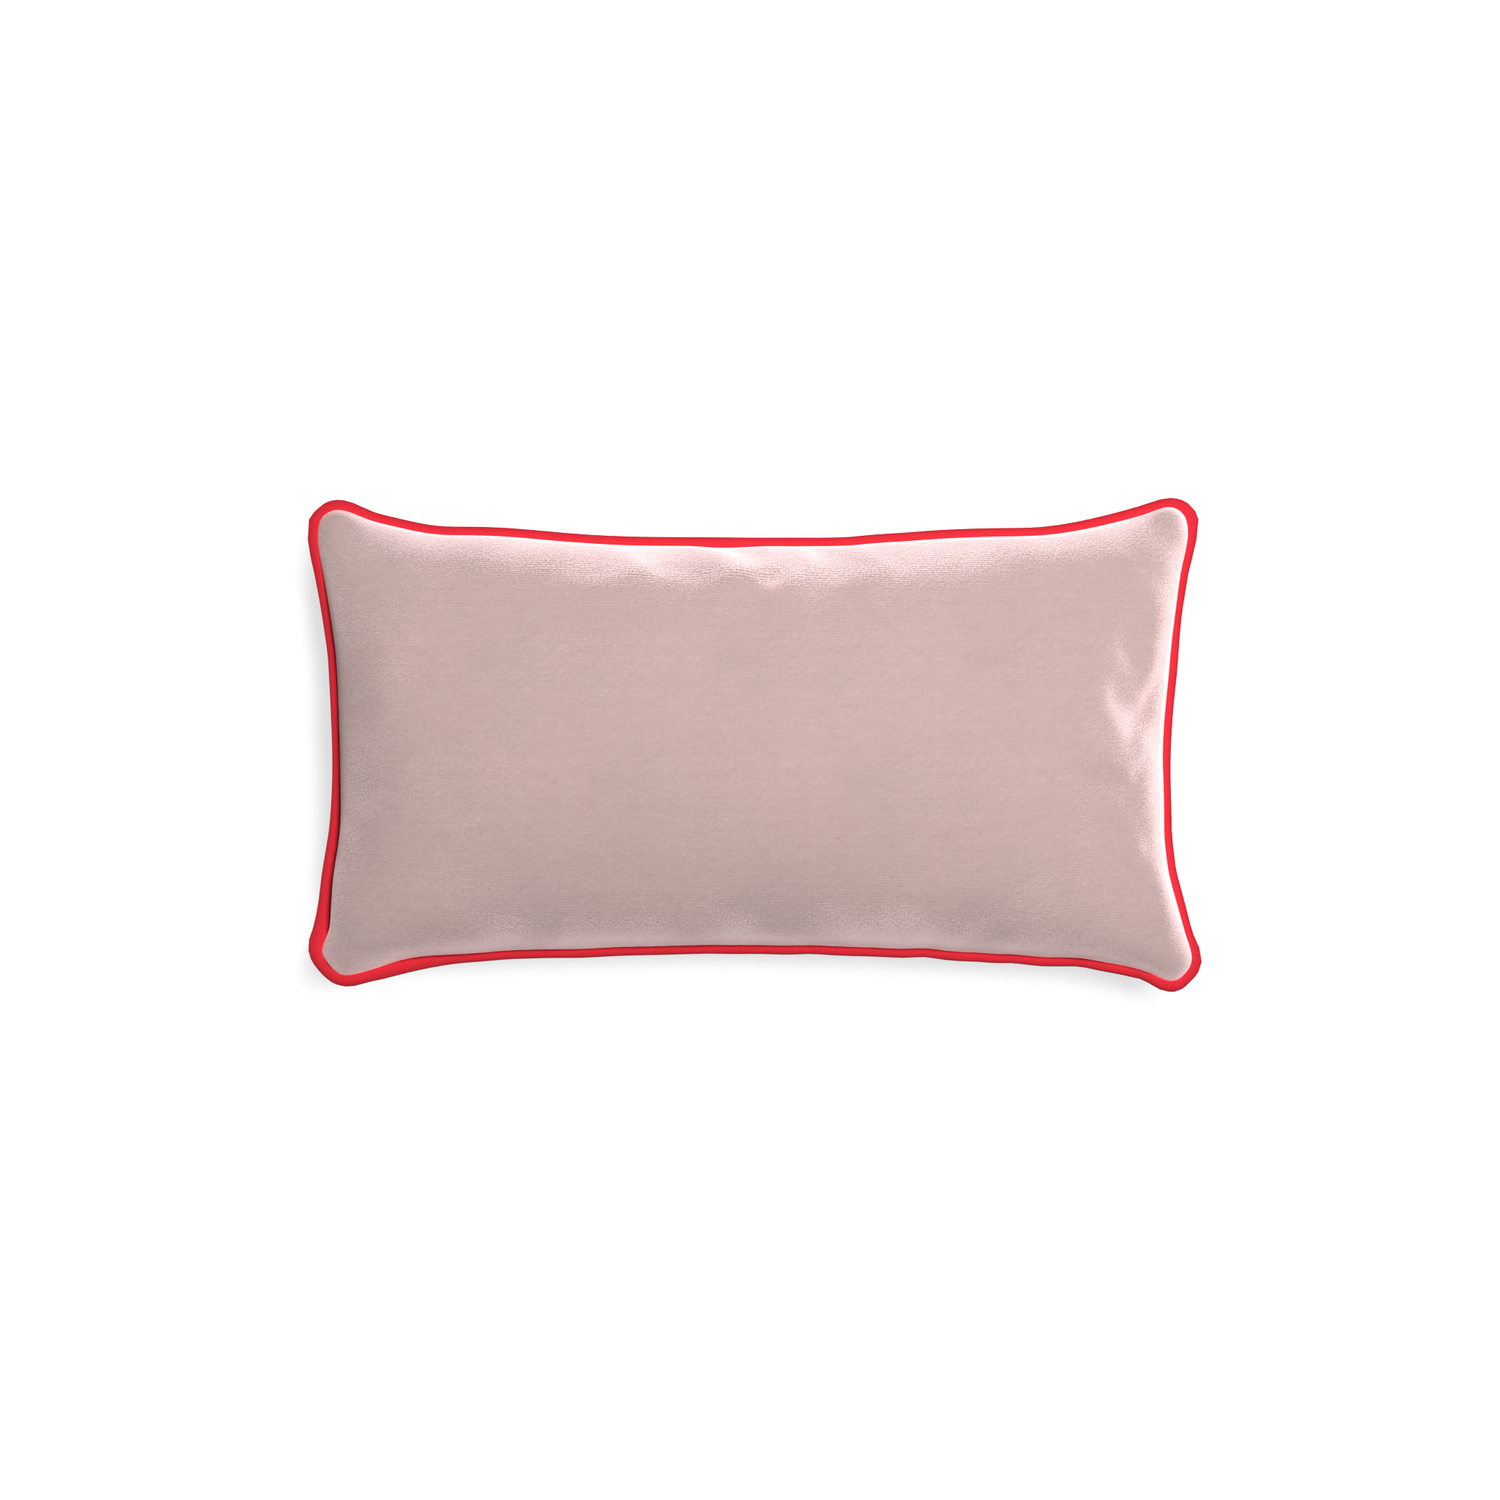 rectangle light pink velvet pillow with red piping